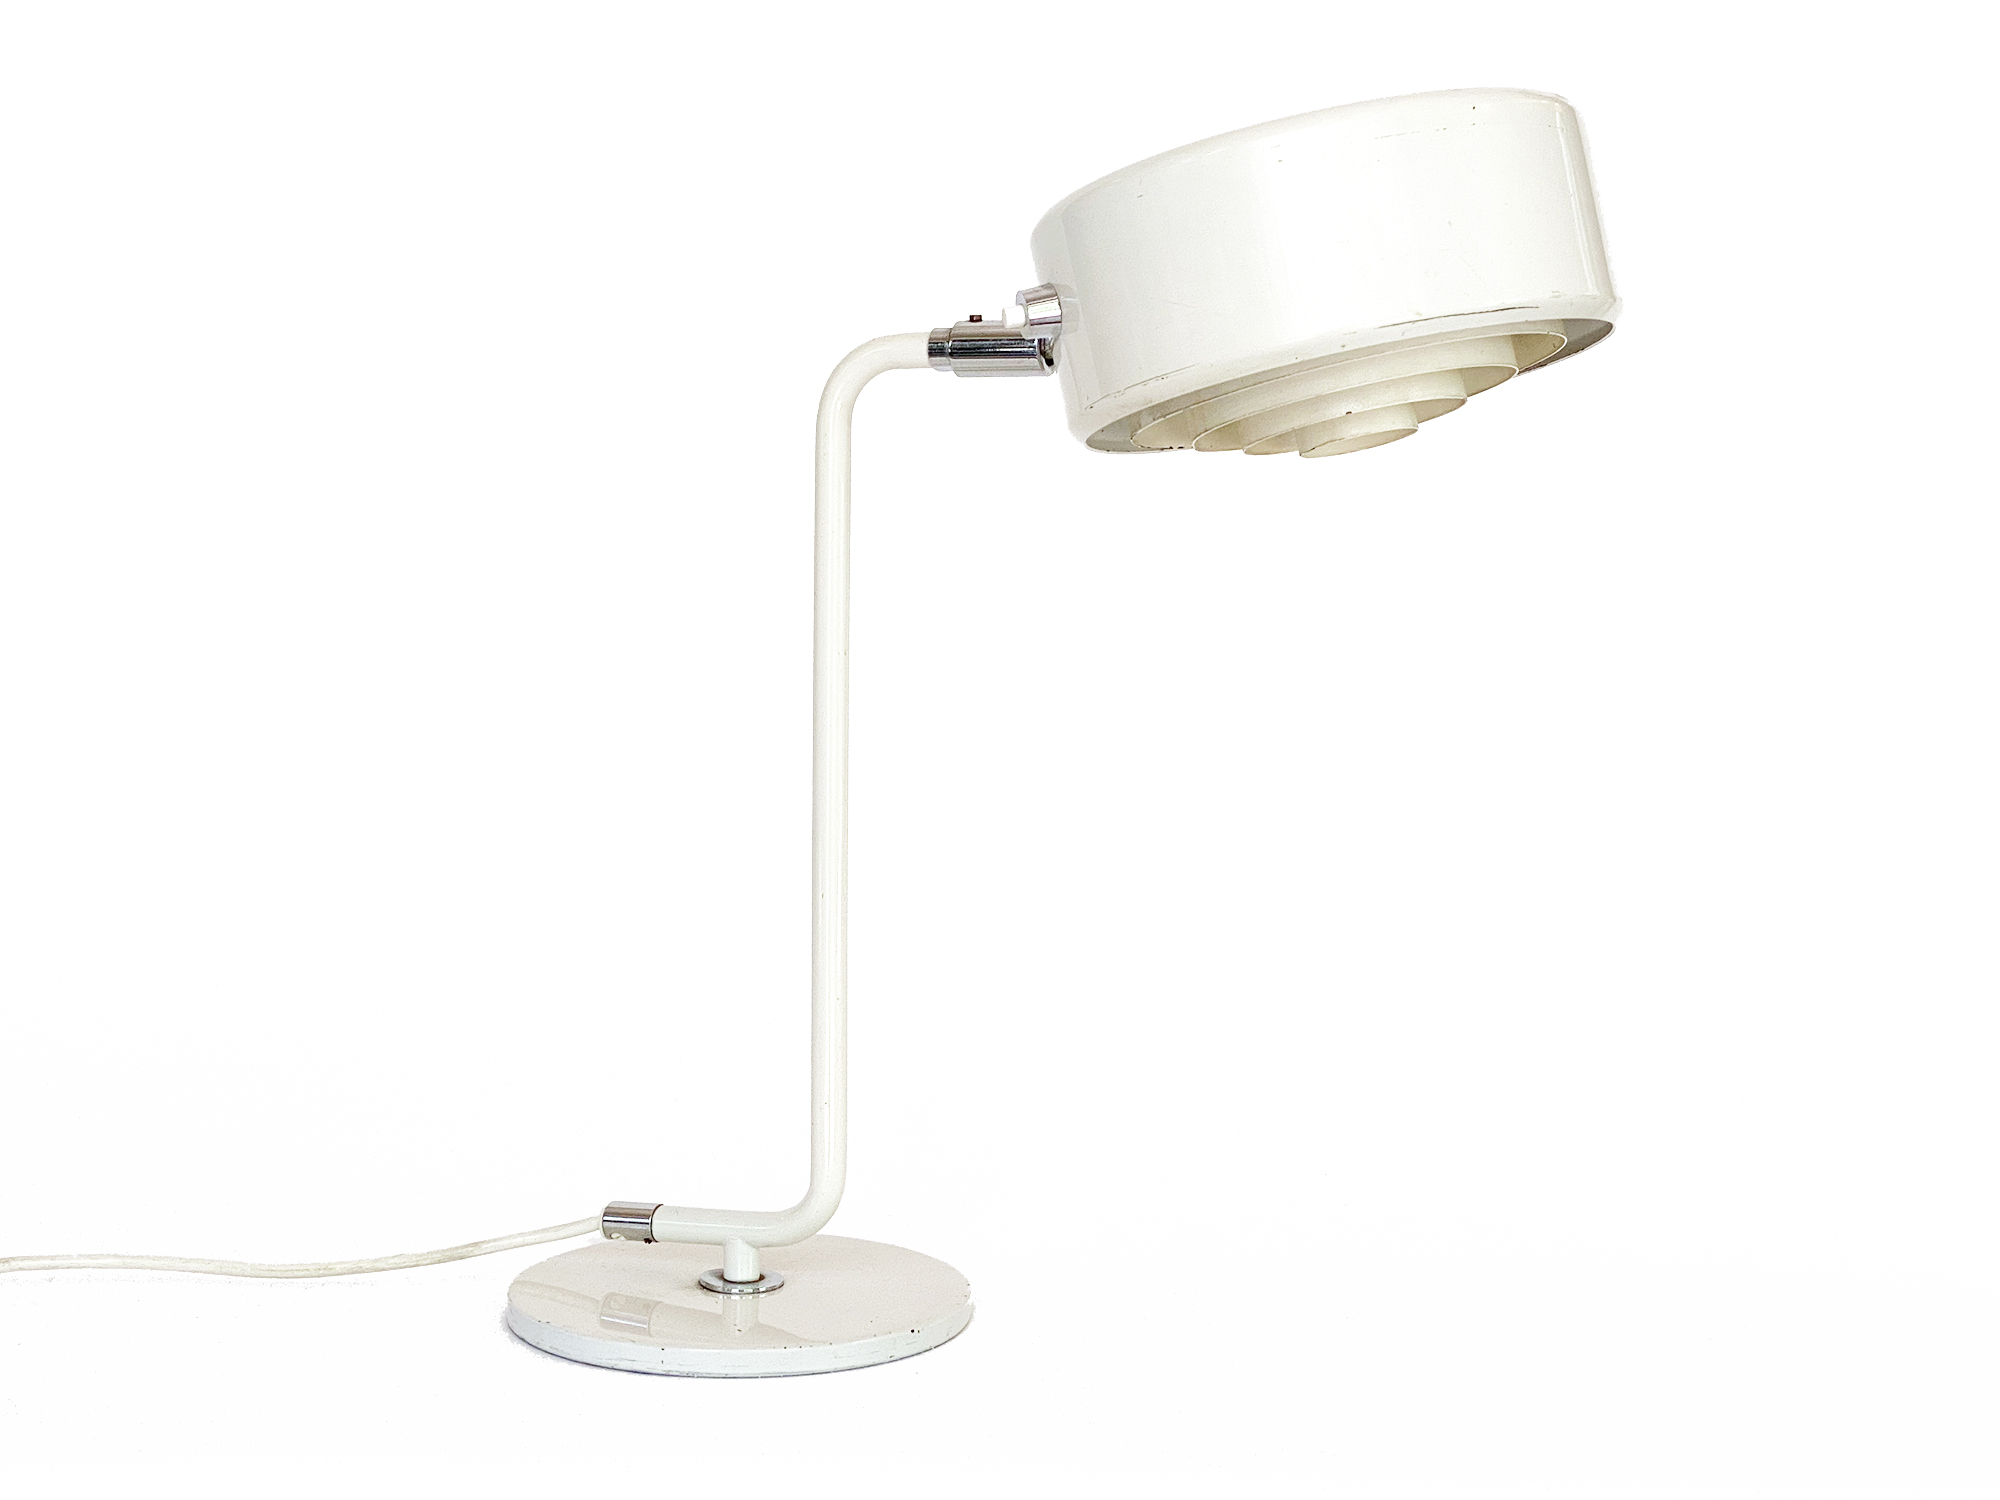 Desk lamp "The Olympic light" by Anders Pehrson for Ateljé Lyktan. Sweden 1970s